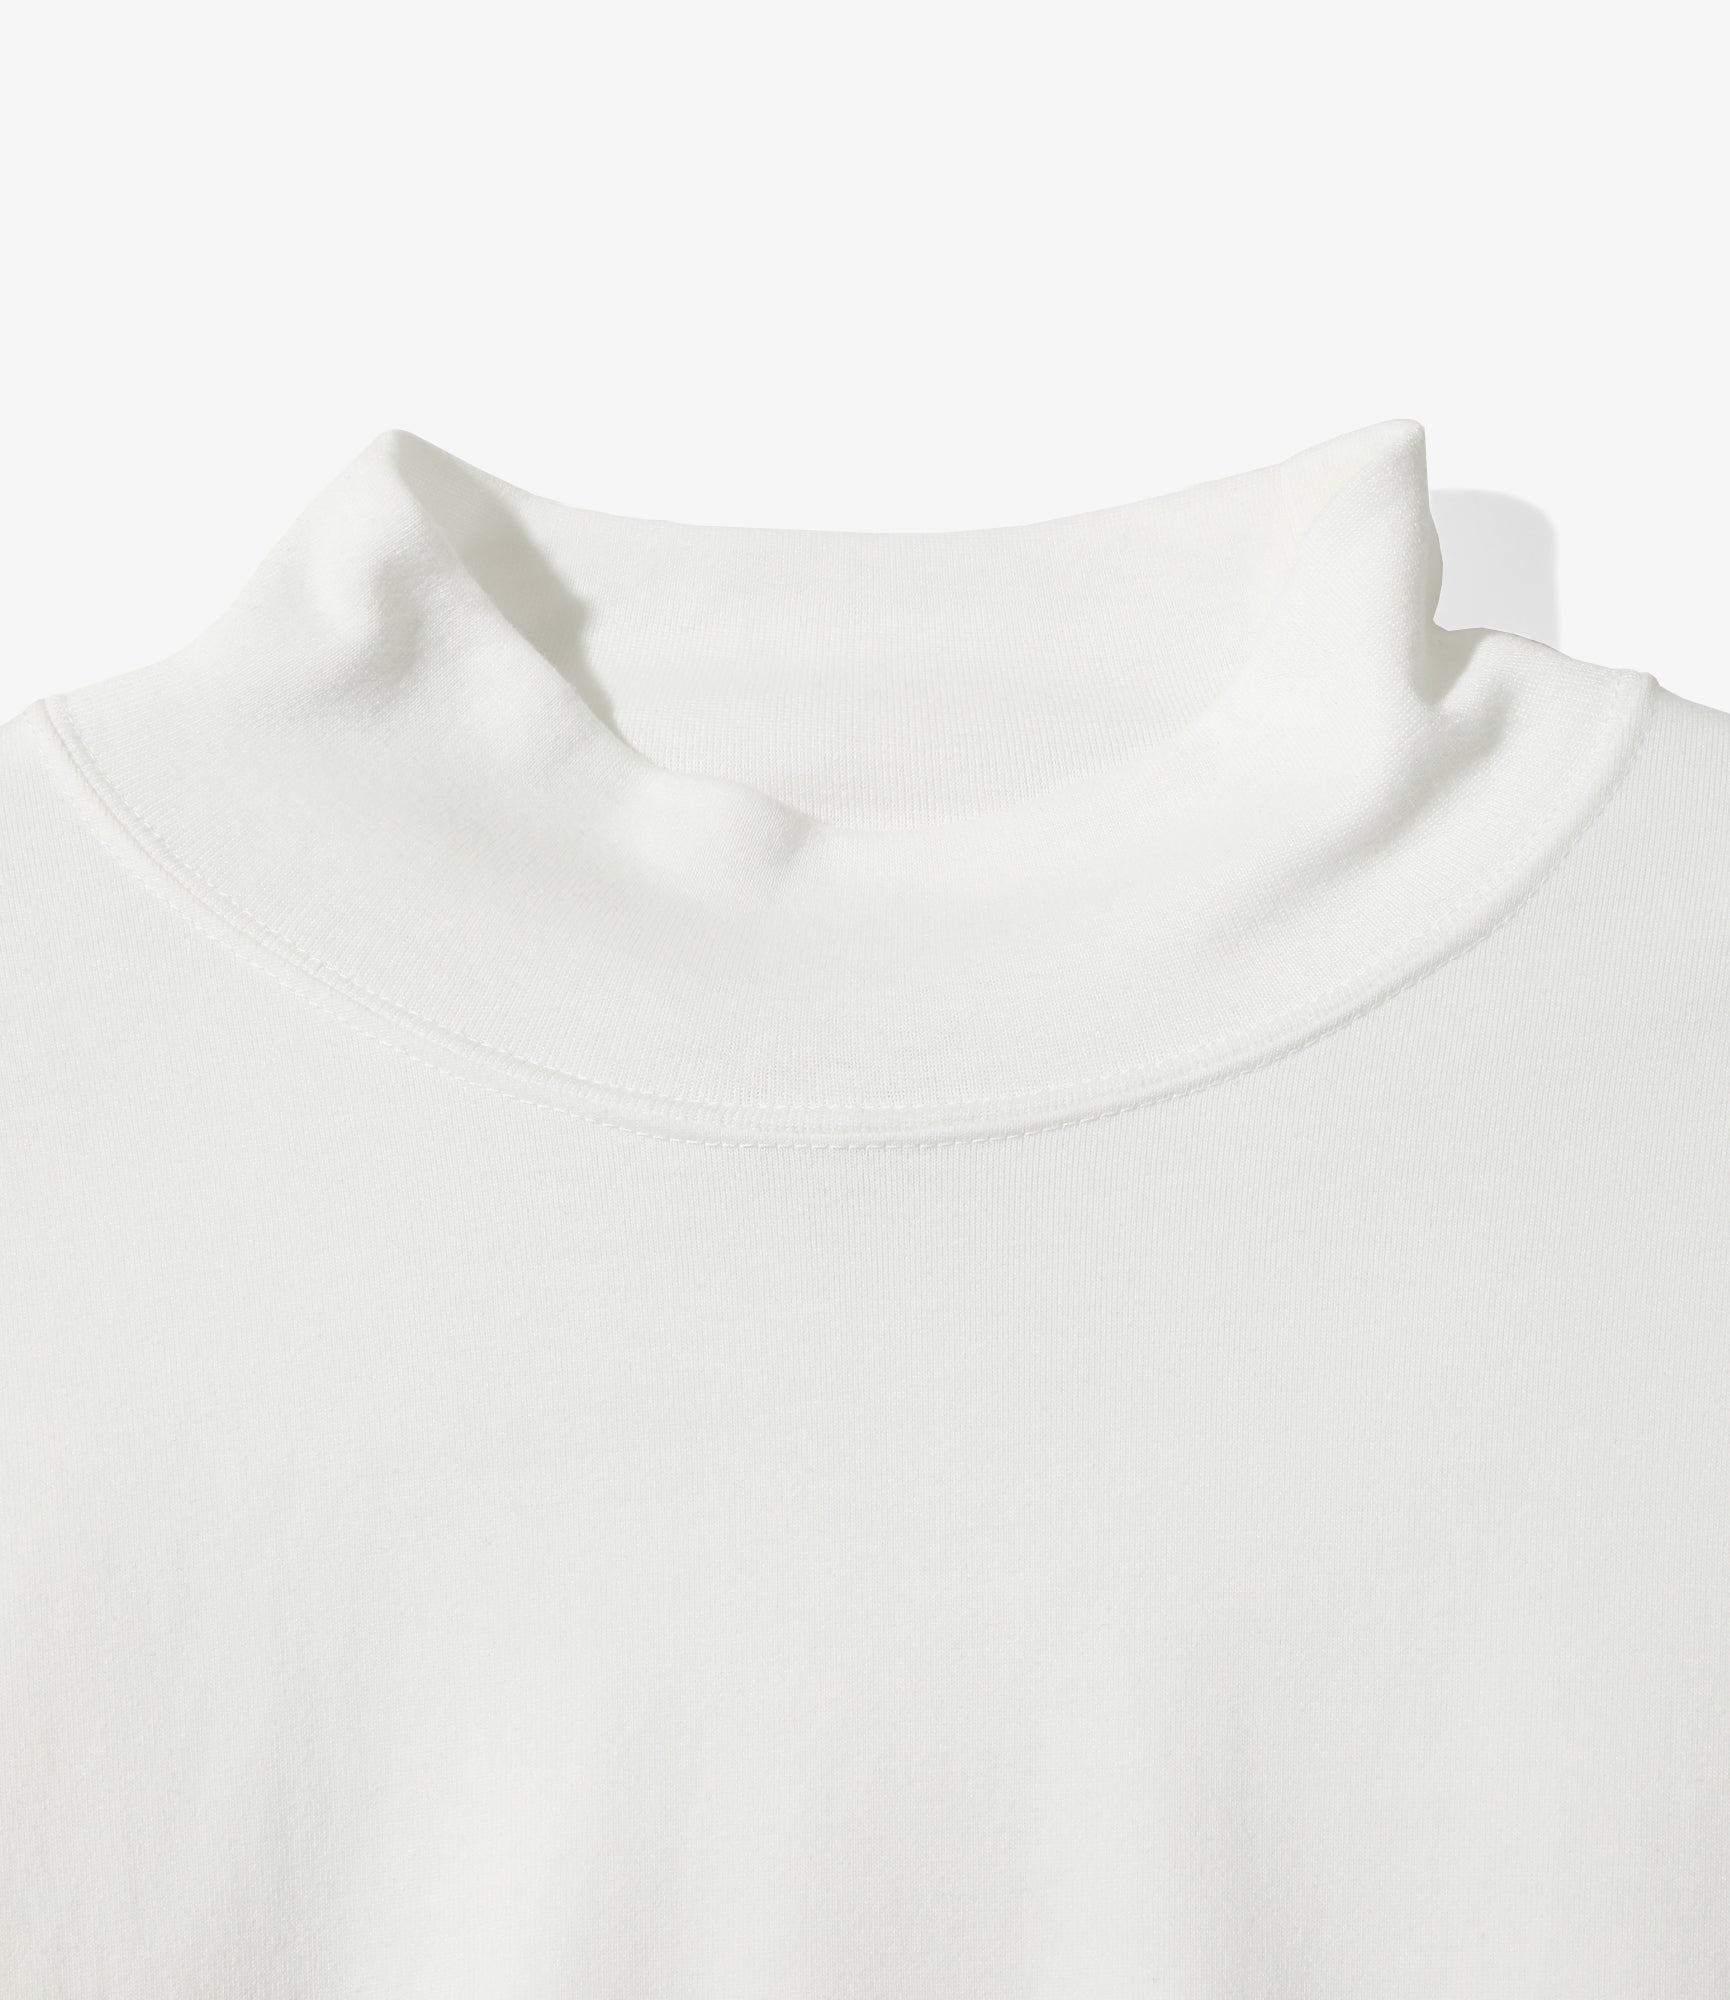 S/S Mock Neck Tee - White - Poly Jersey